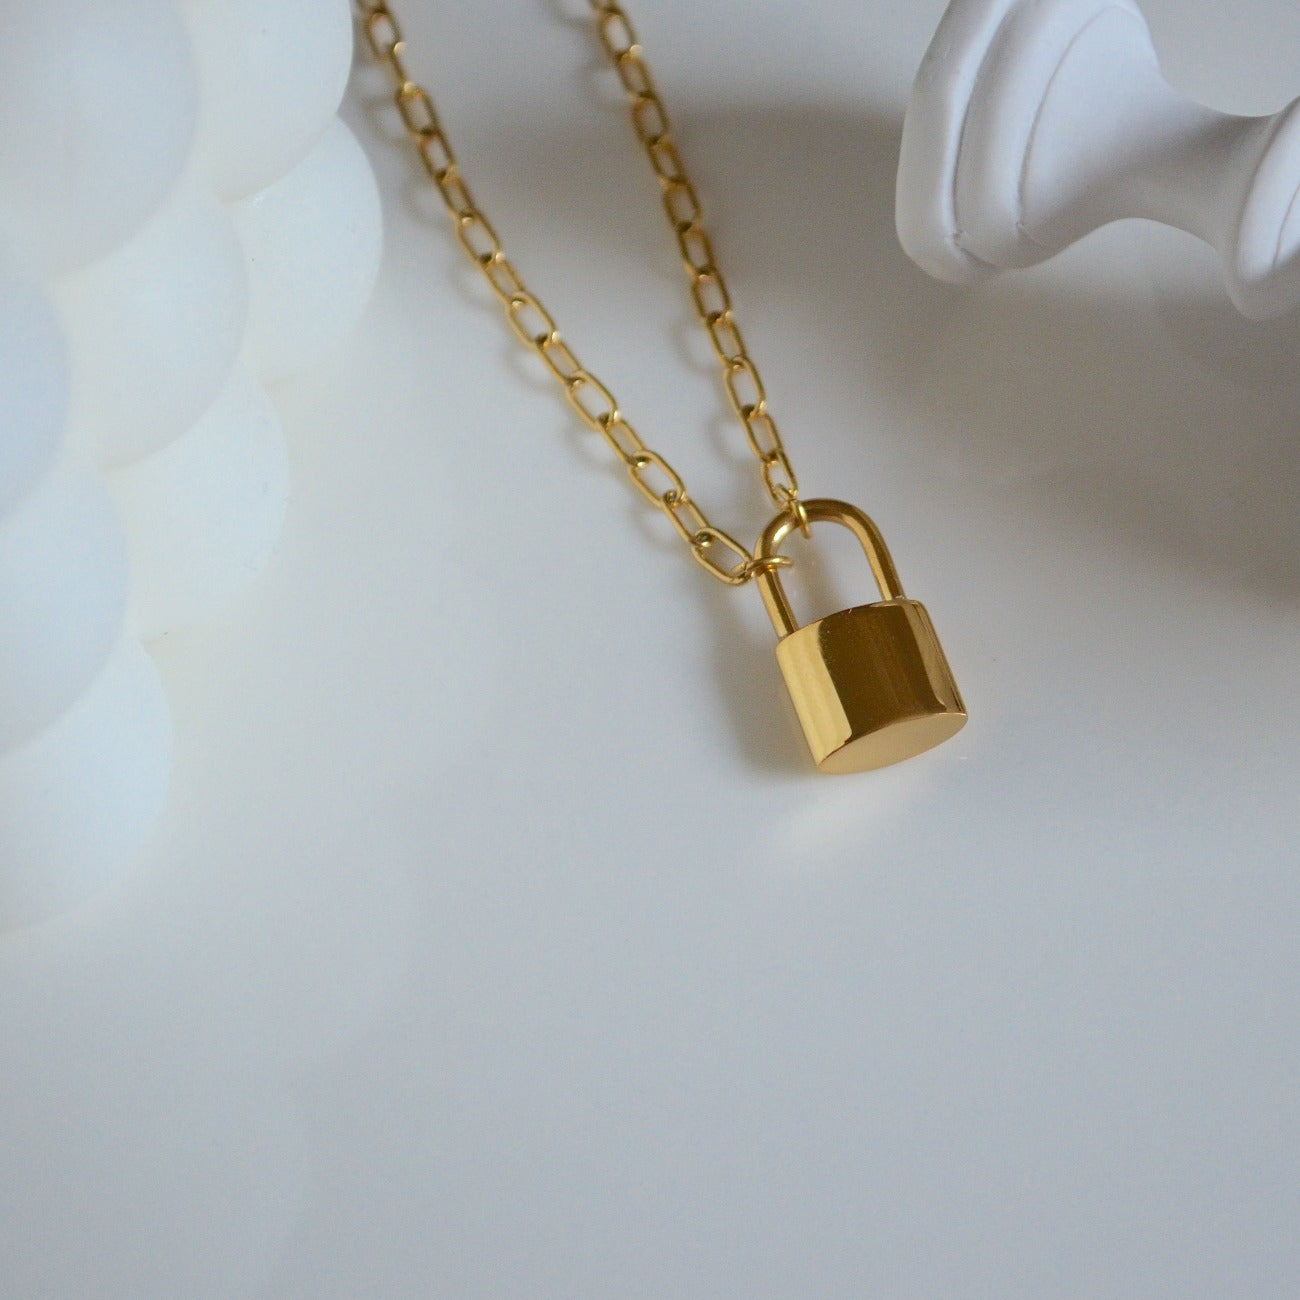 Gold Padlock Statement Necklace Minimal Lock Necklace for 